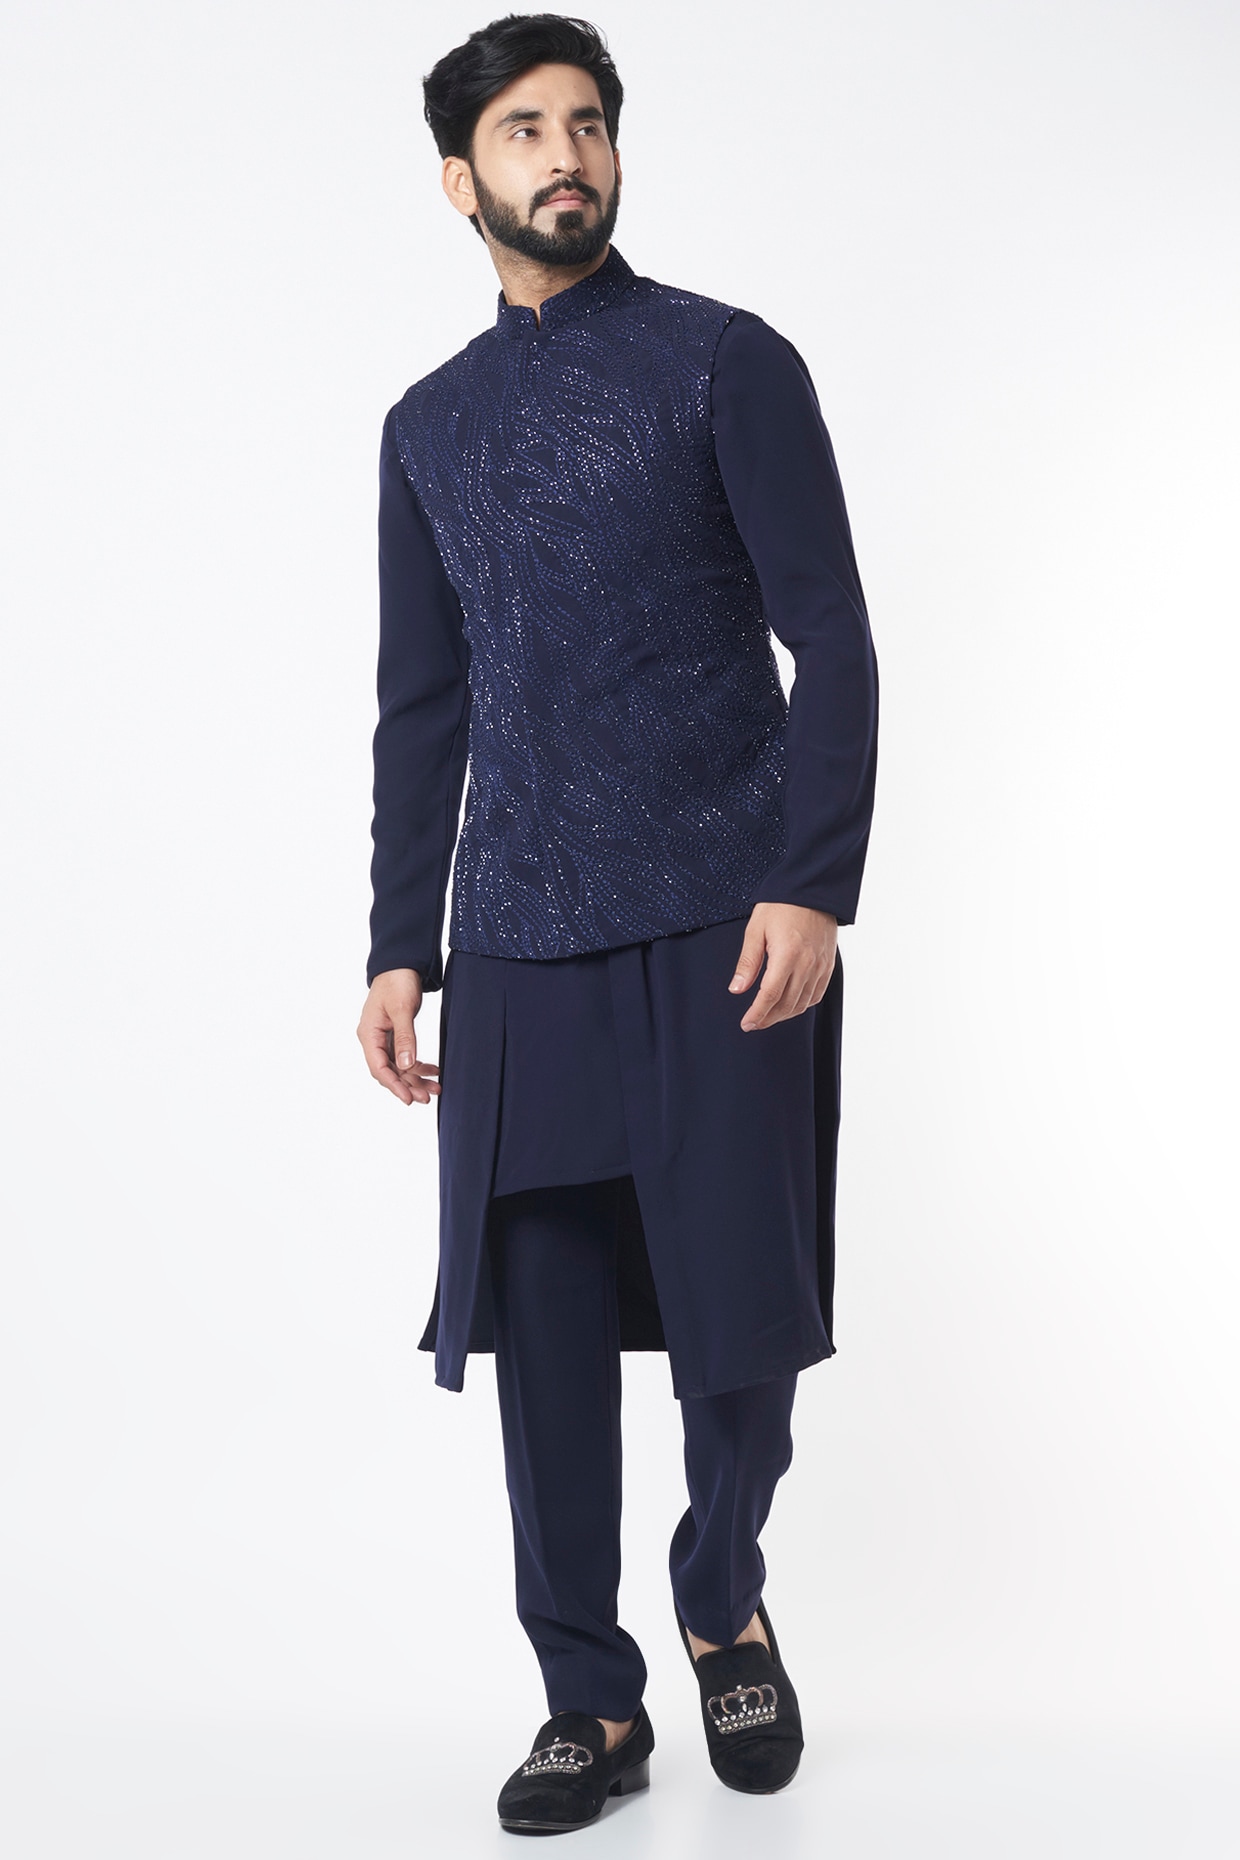 Peacock Blue Nehru Jacket Set With Embroidery Work | Nehru jackets, Jackets,  Wearing red